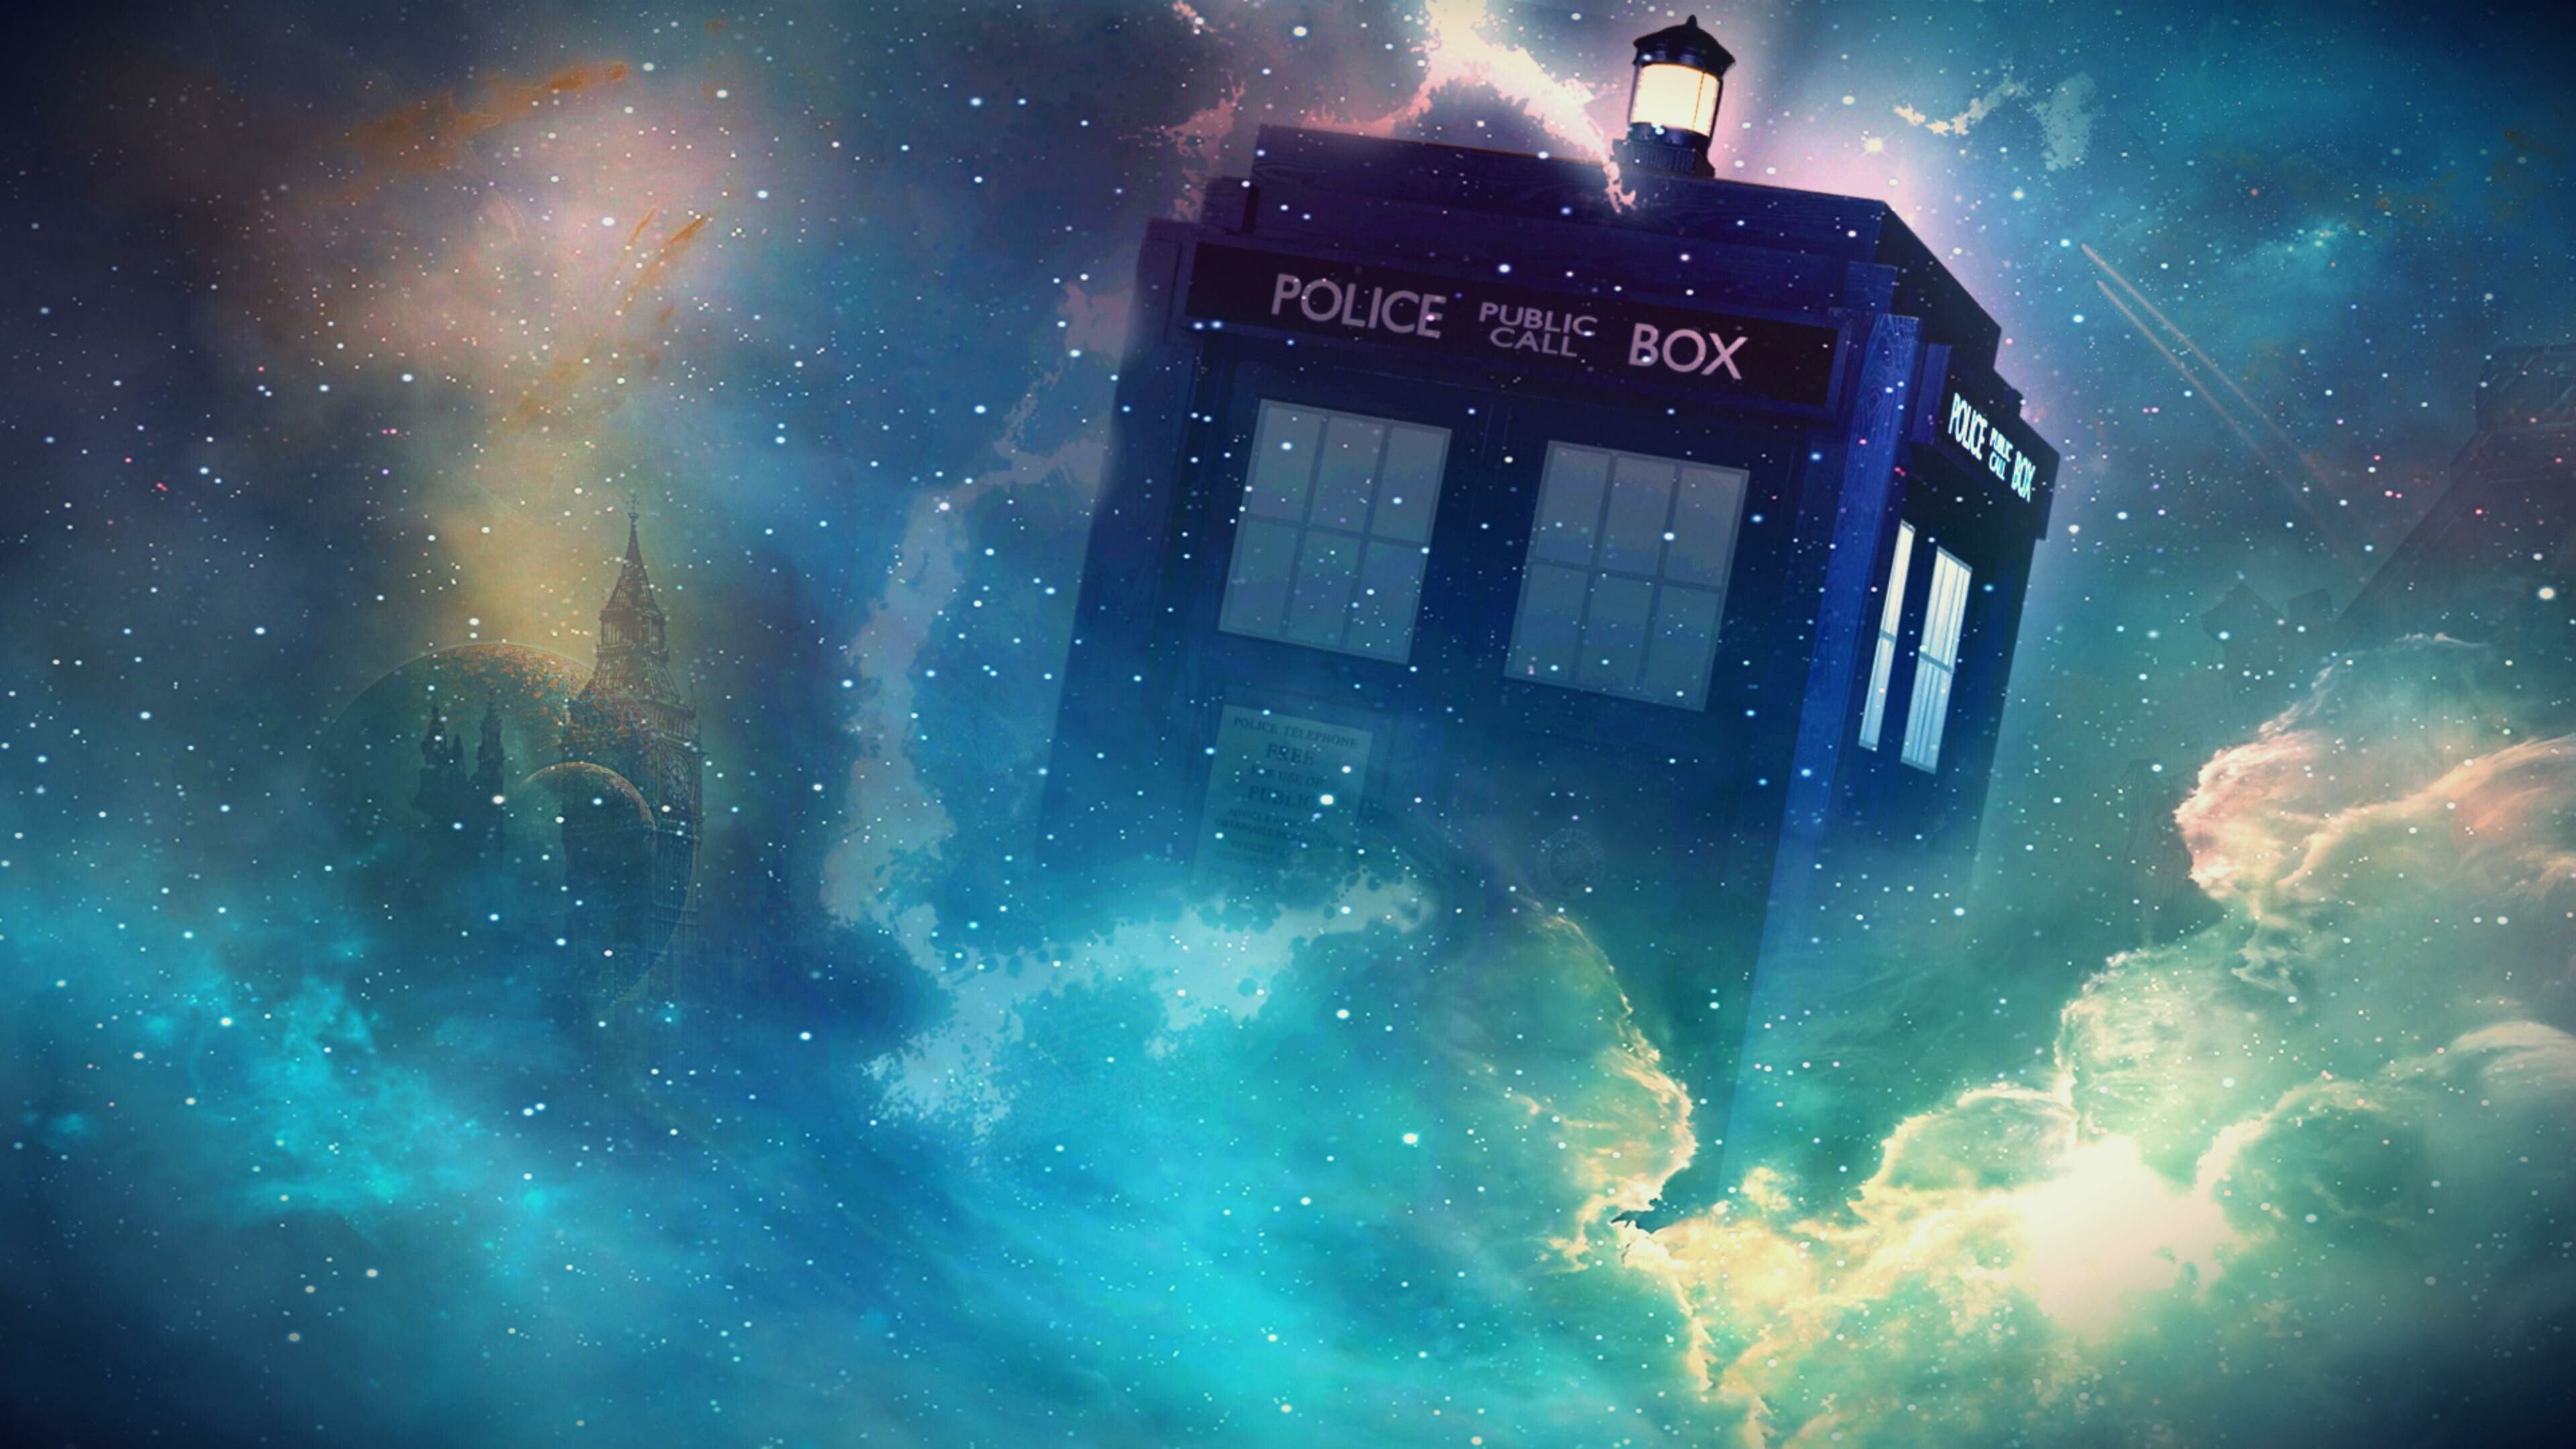 Doctor Who: A British science fiction television series broadcast by the BBC since 1963. 3840x2160 4K Wallpaper.